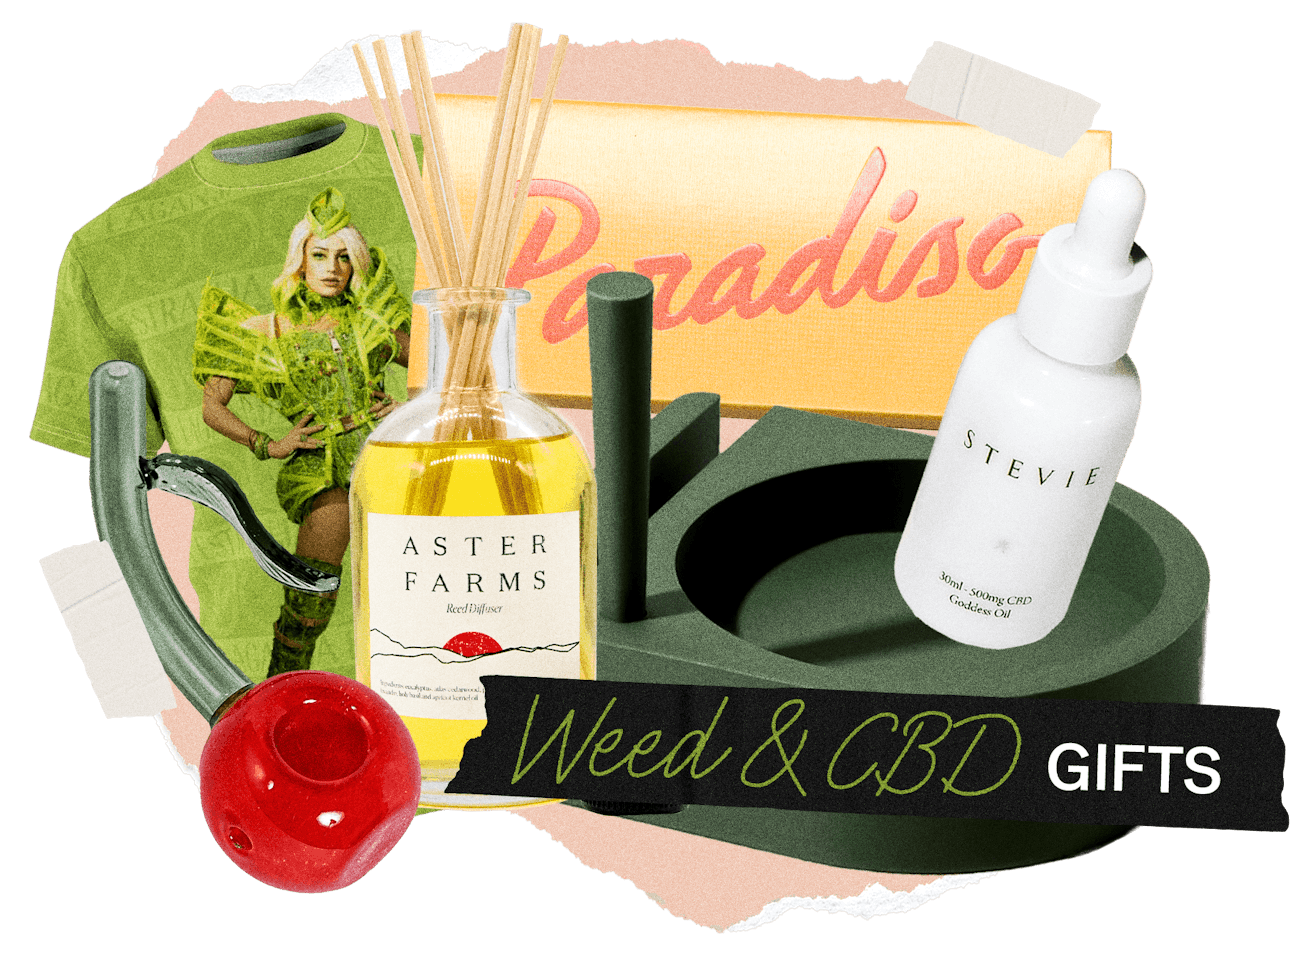 Weed and CBD gifts with a green background